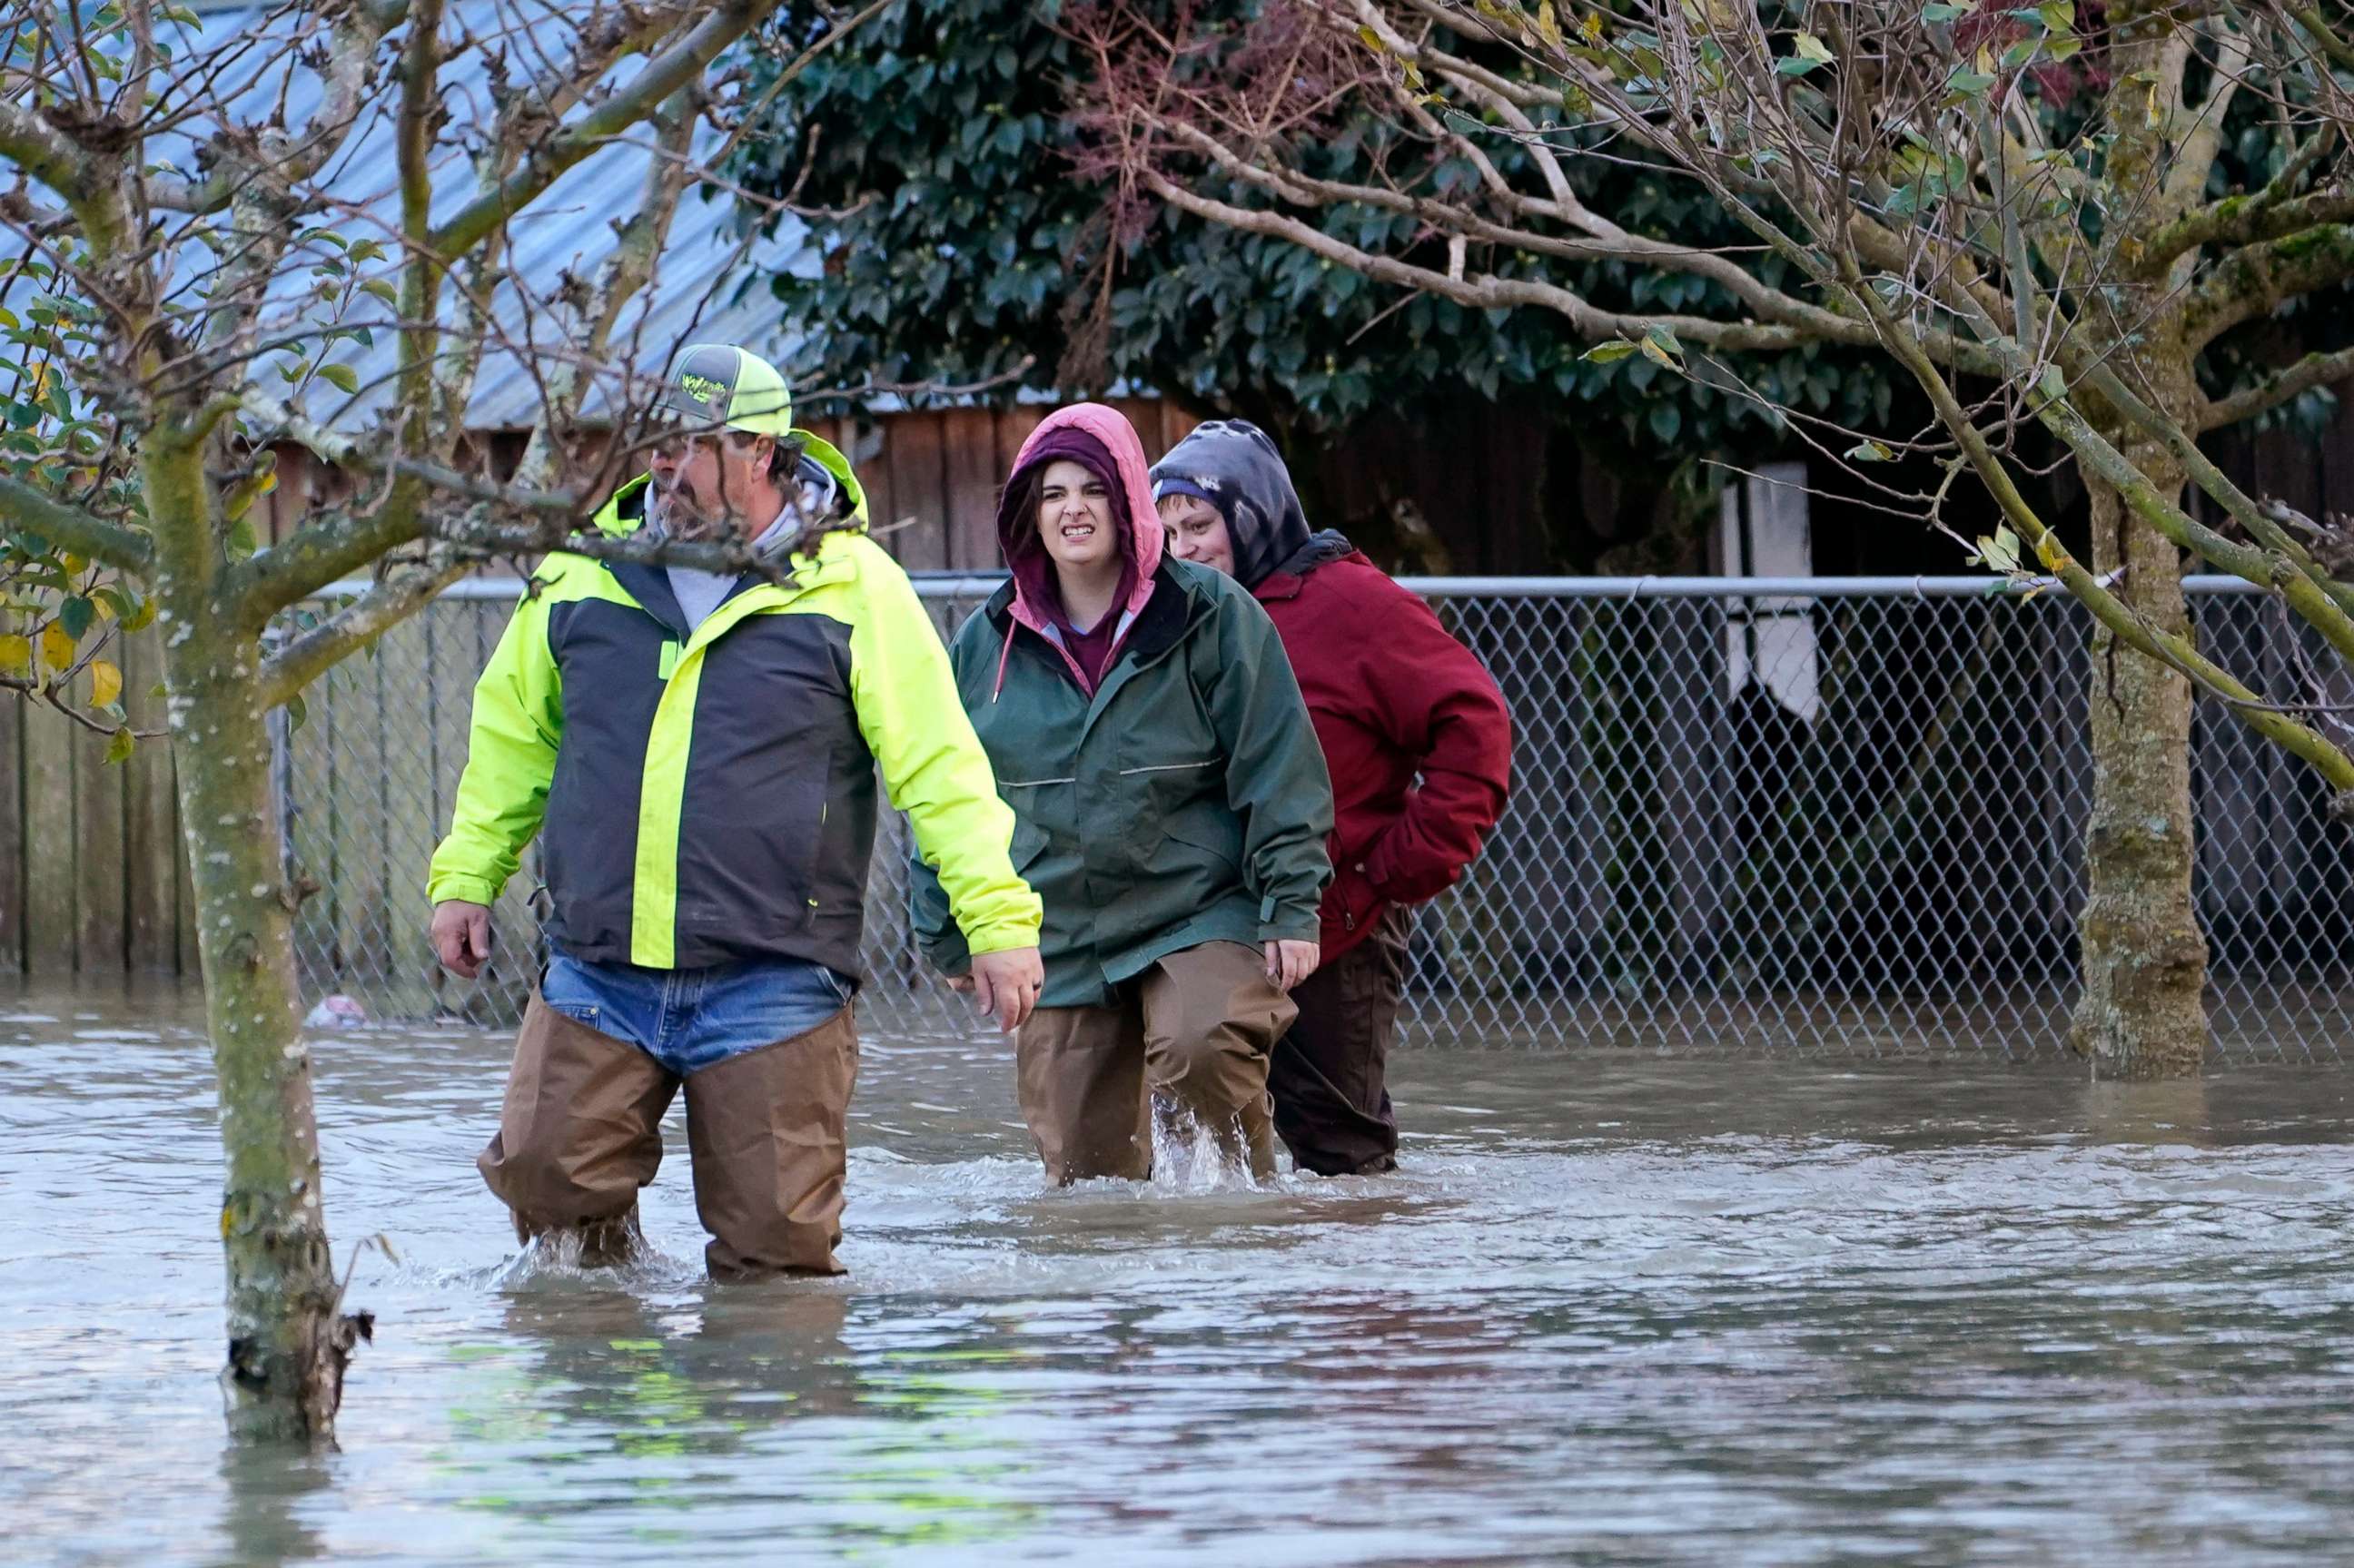 PHOTO: Dale Archer, left, leads his daughters Myranda and Krysten Archer through floodwater, Nov. 15, 2021, in Sedro-Woolley, Wash., after heavy rainfall brought major flooding of the Skagit River.